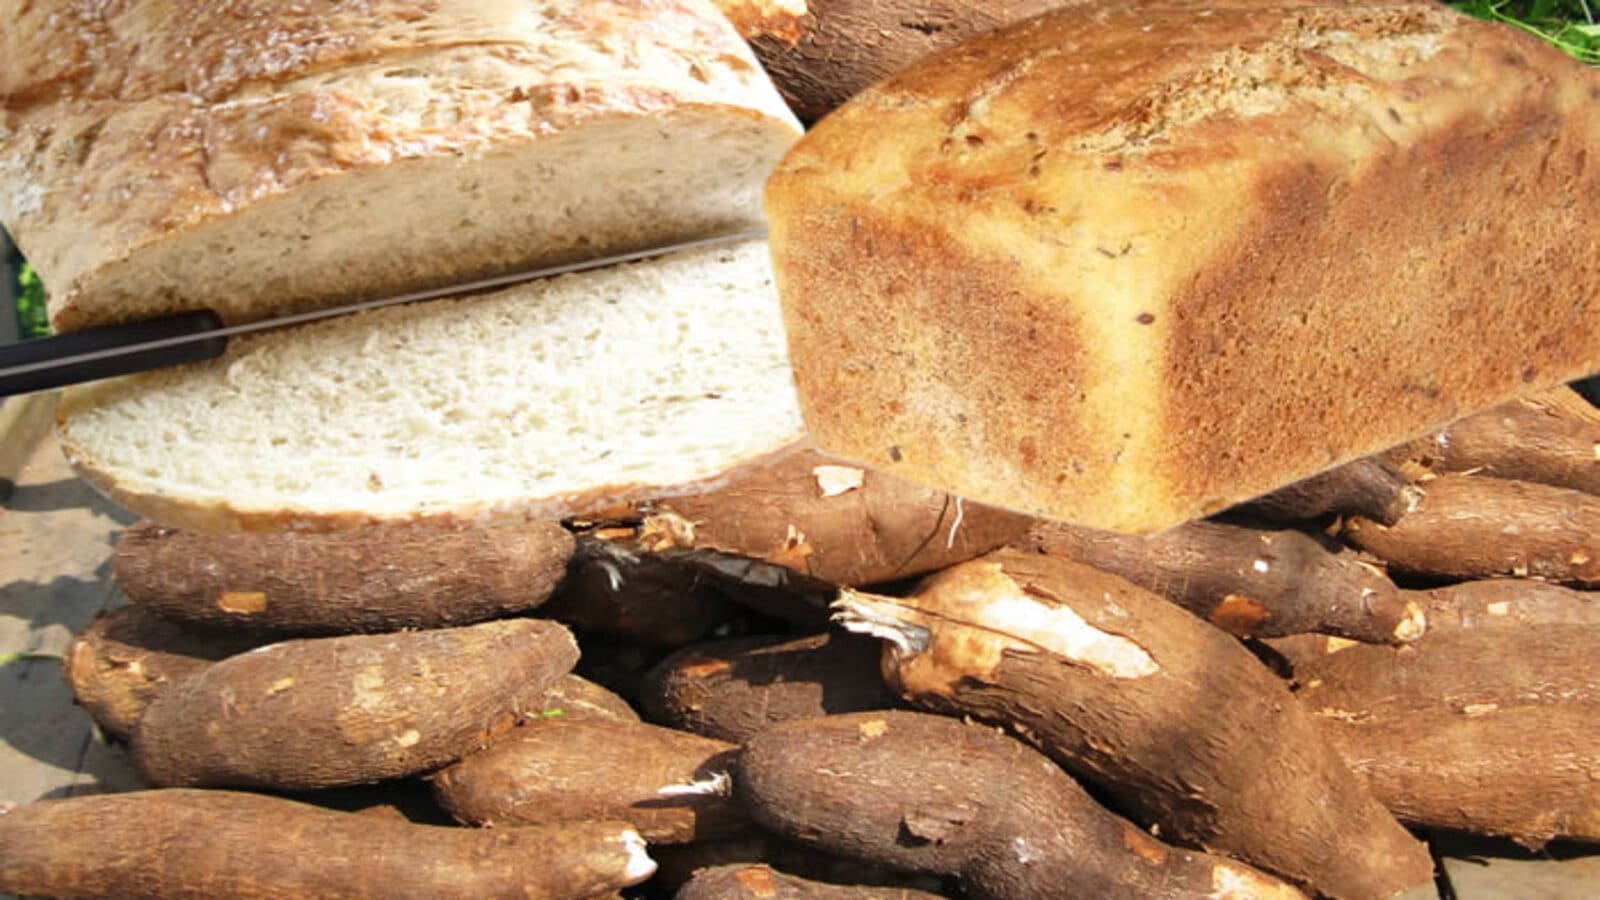 Nigeria losing over US$200M for failing to incorporate cassava flour in bread production, NCGA says